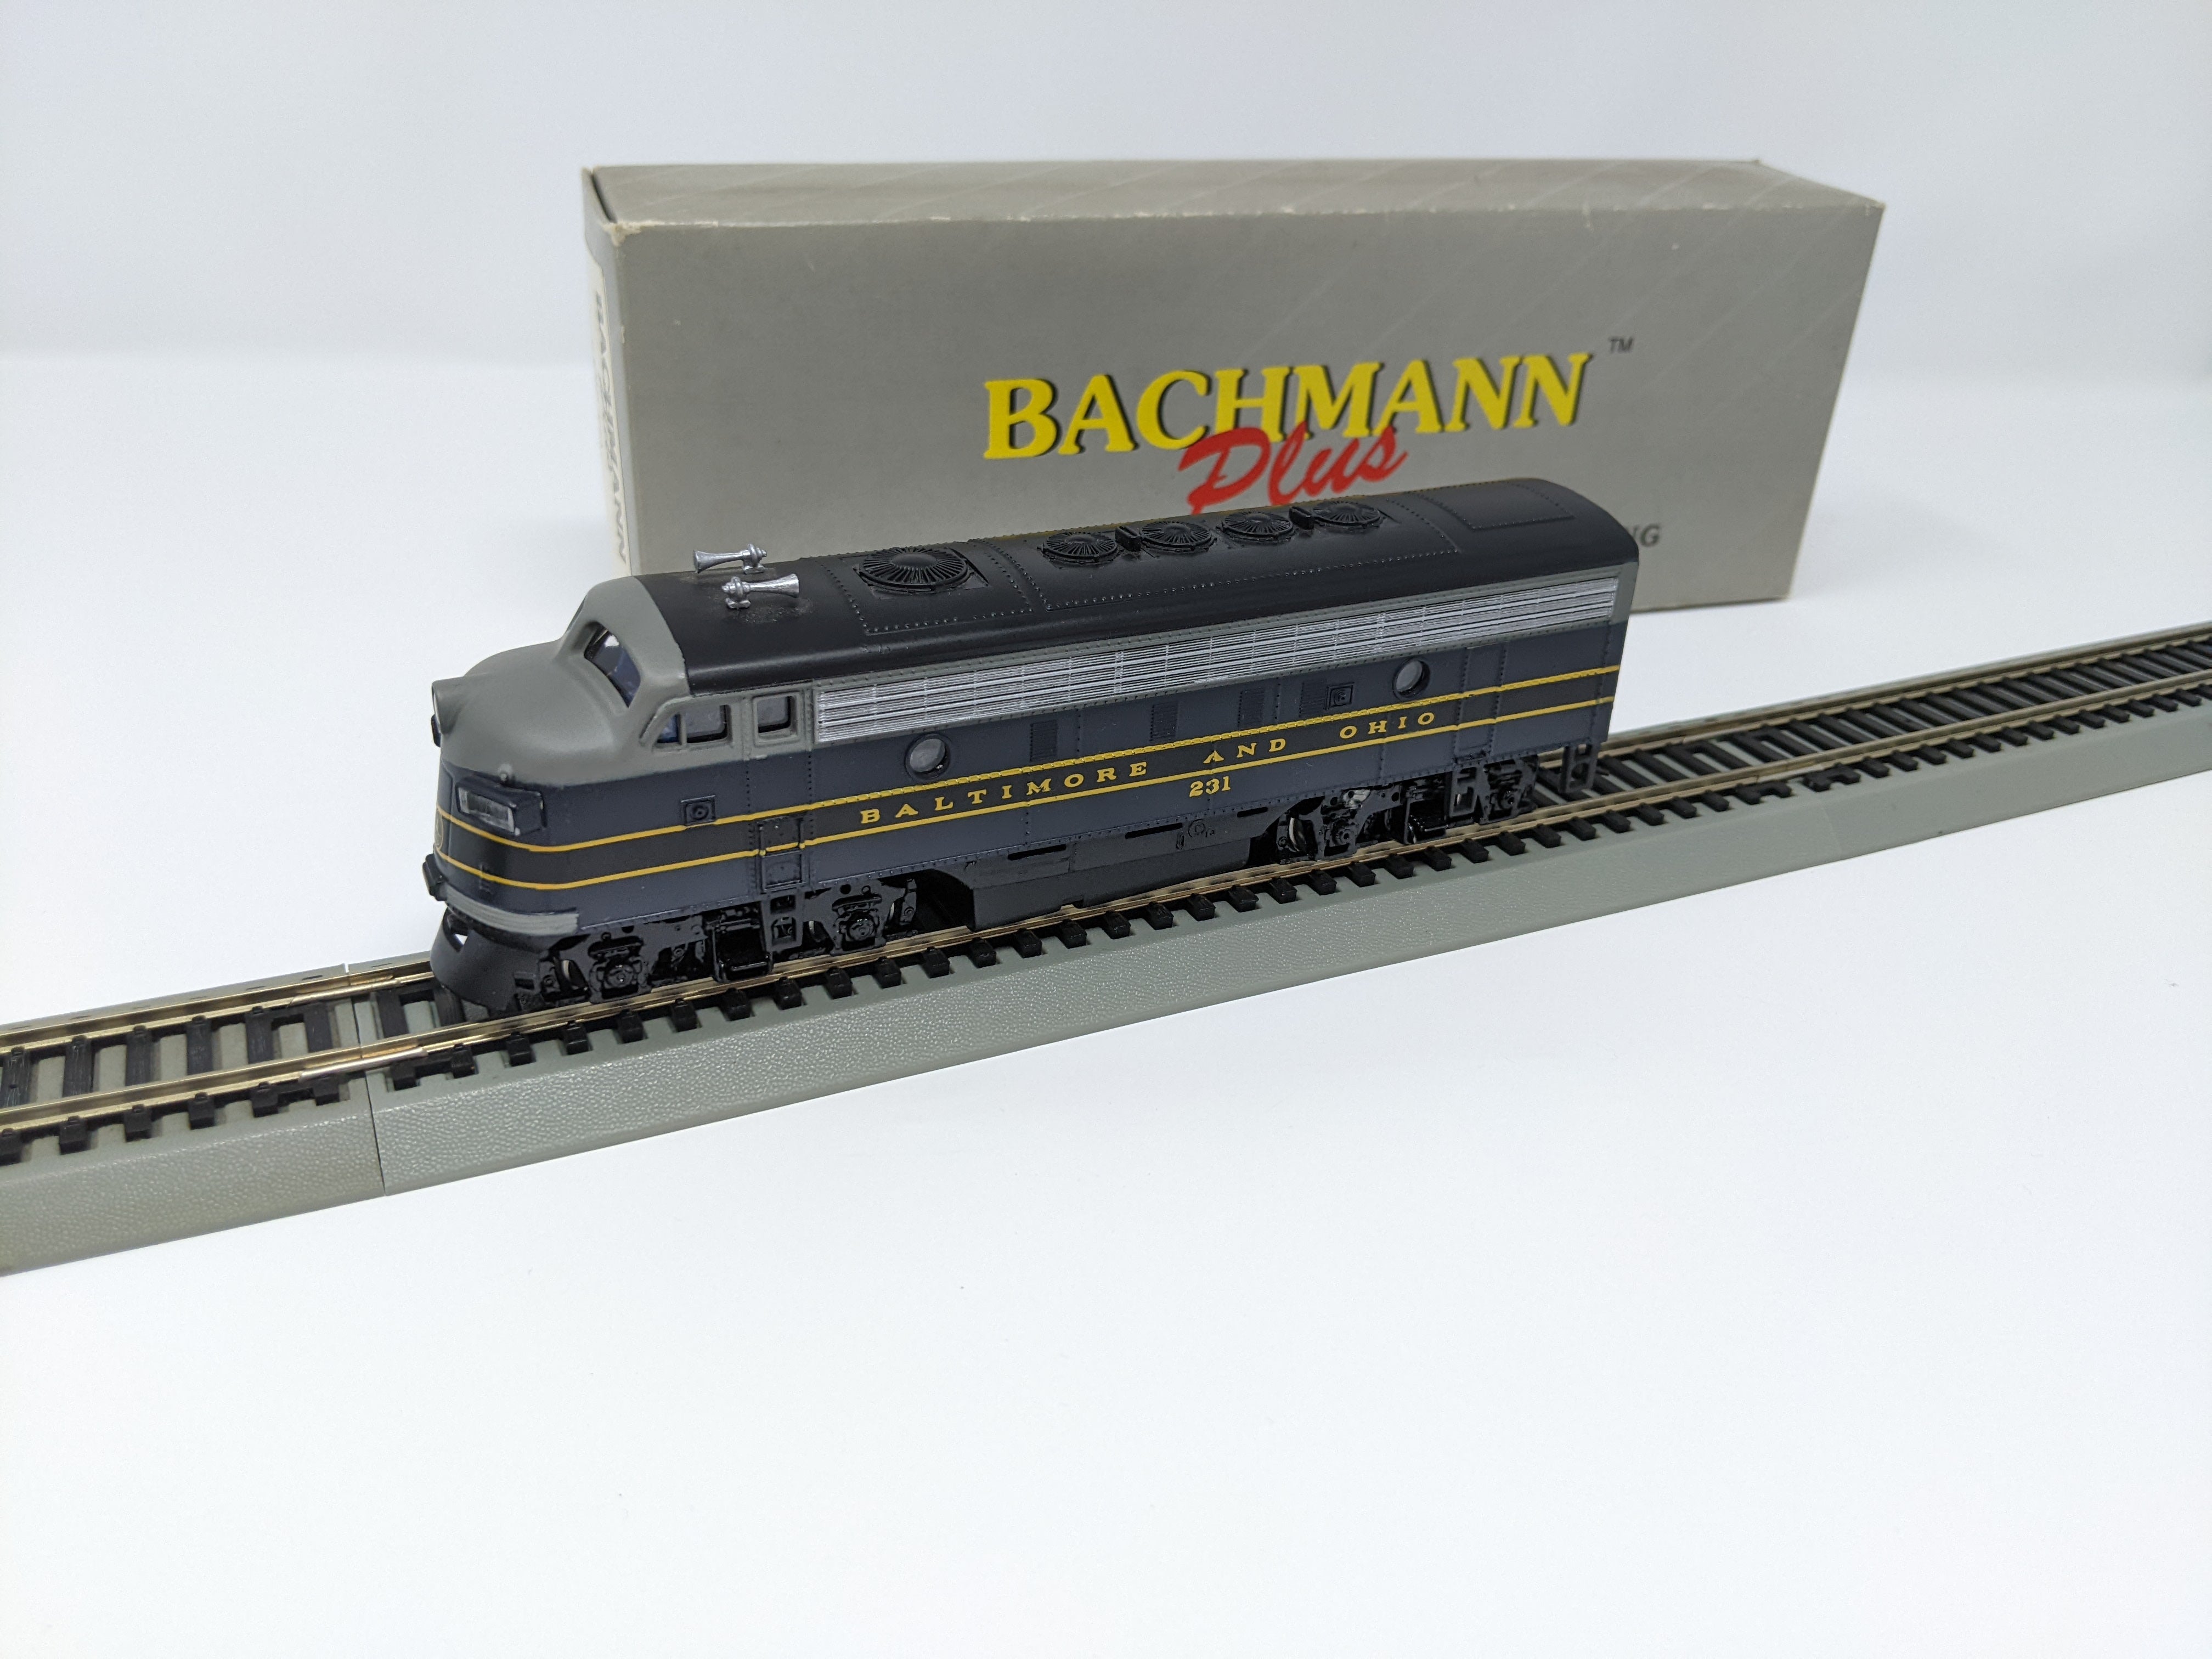 USED Bachmann 31211 HO Scale, EMD F7A Diesel Locomotive, Baltimore and Ohio #231 (DC)